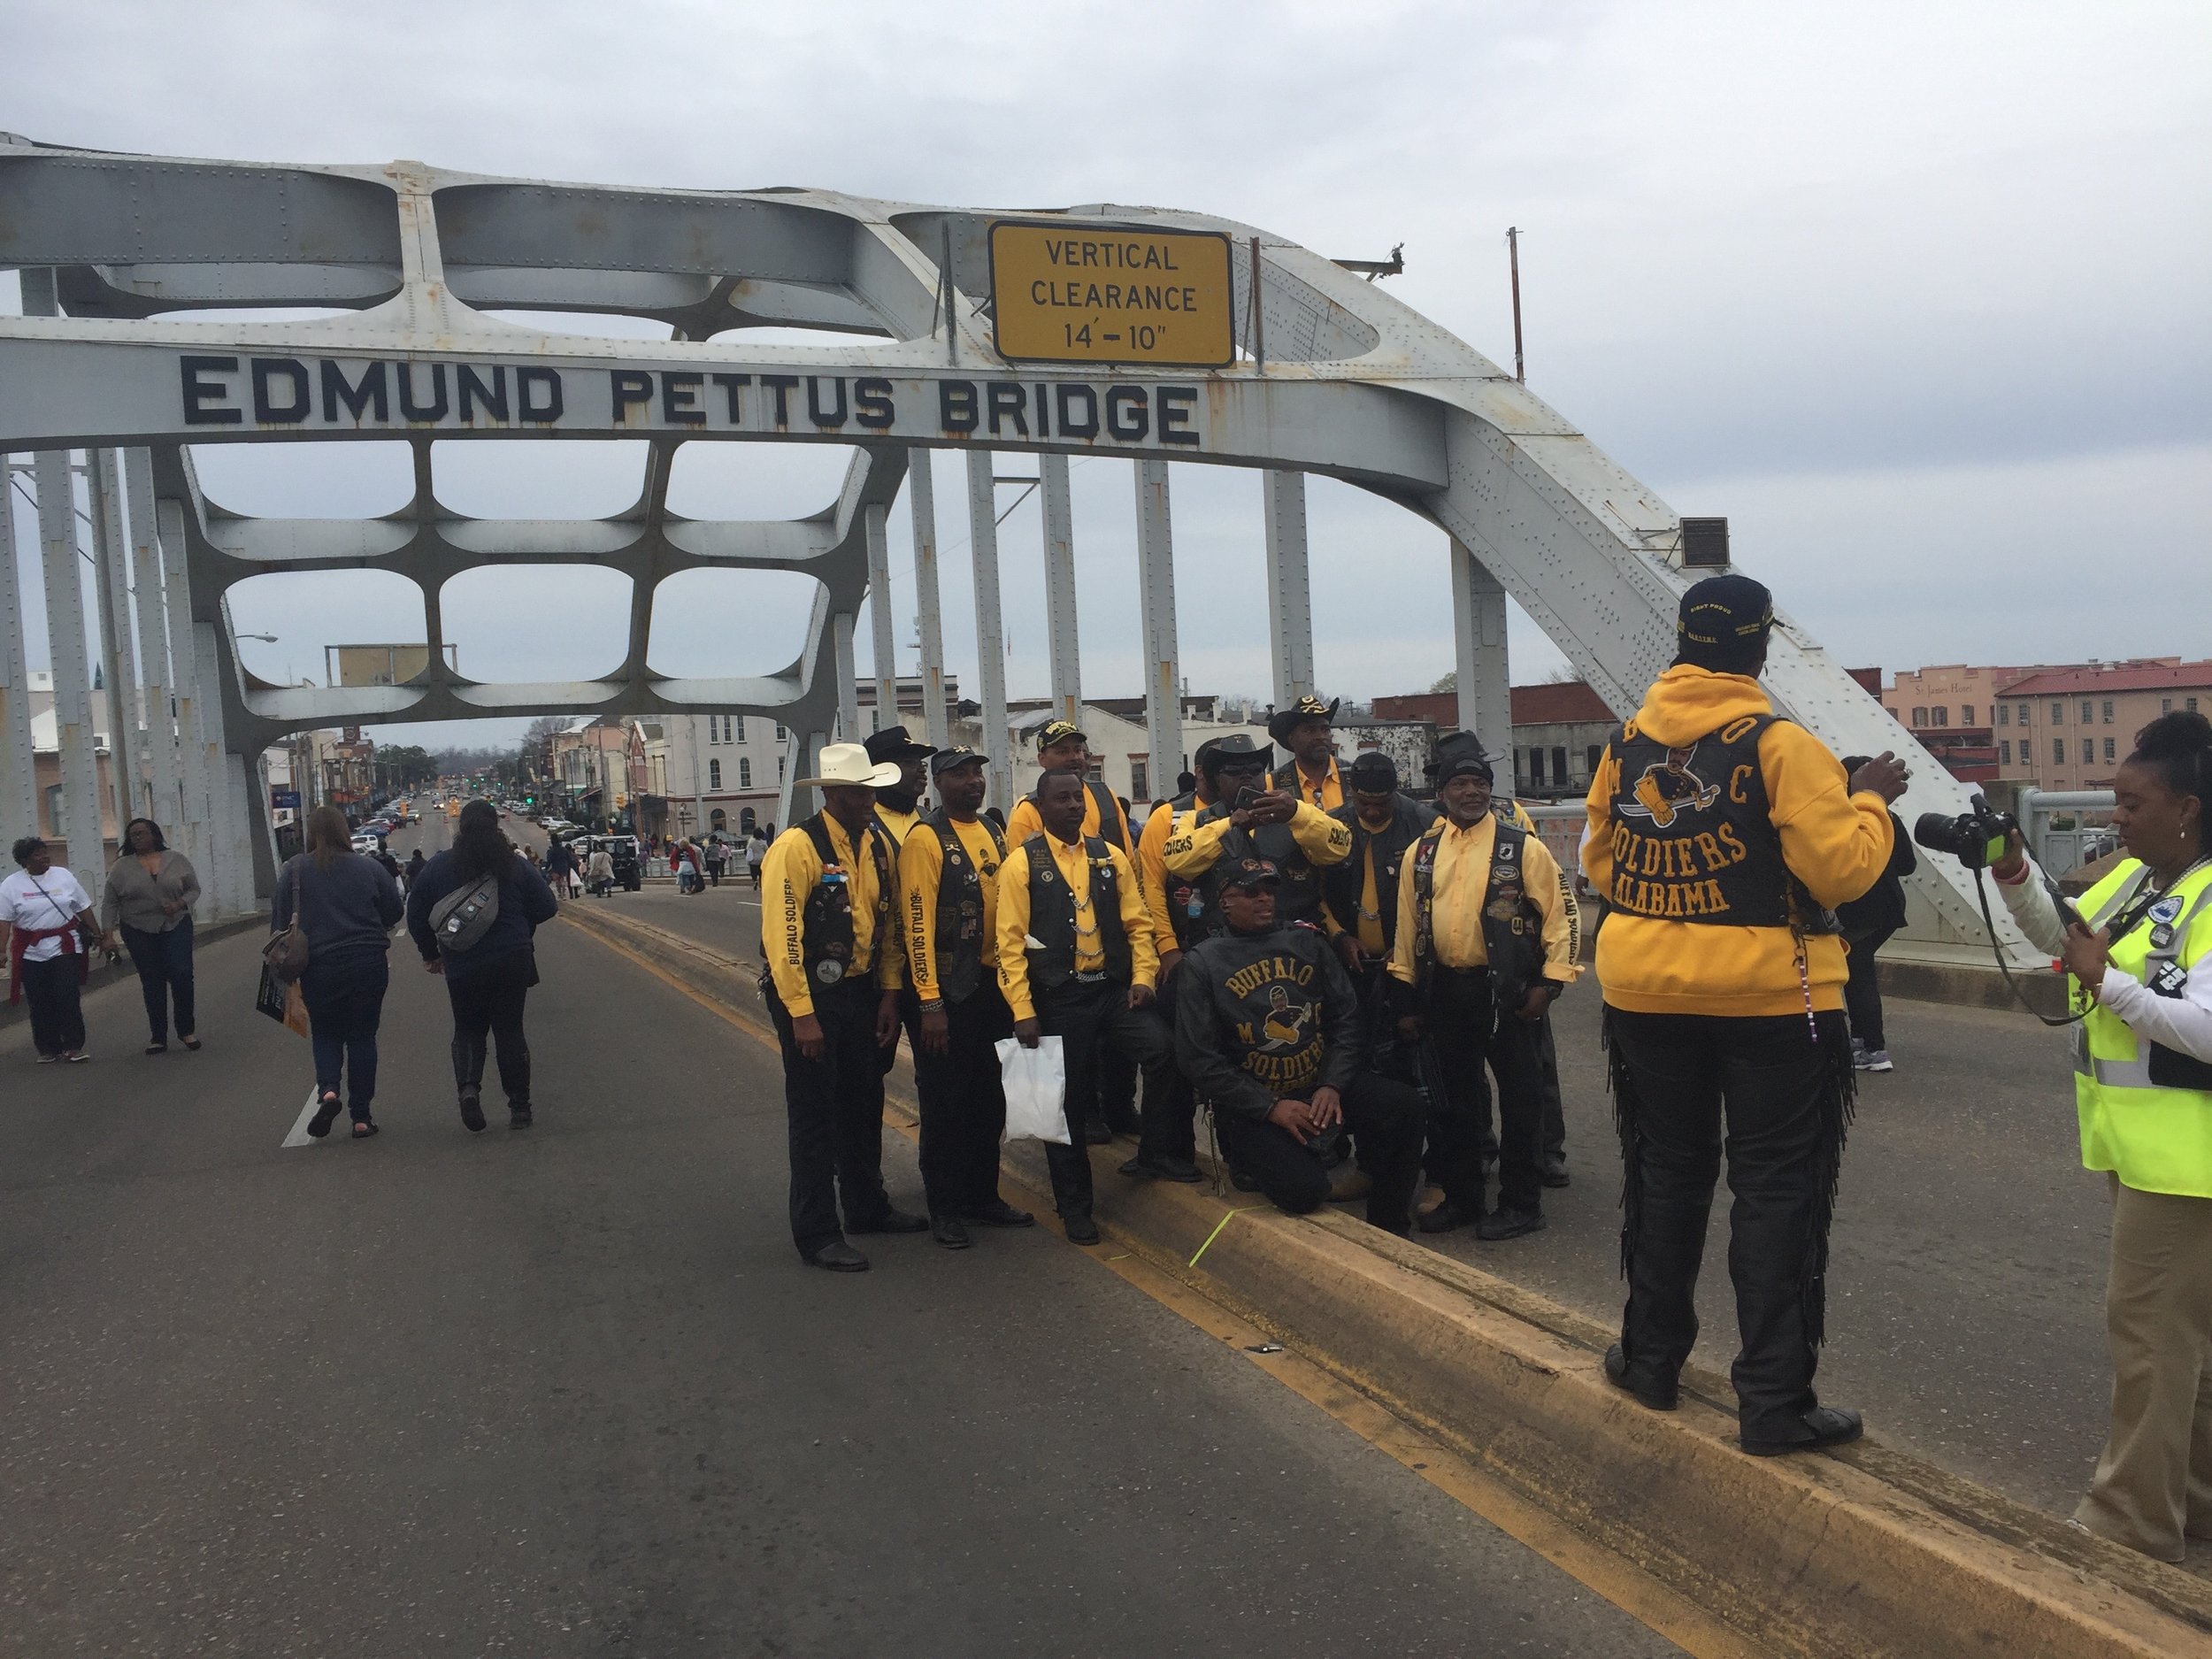  On the Edmund Pettis Bridge in Selma, Ala., where every march, thousands come out to reenact the historic bridge-crossing that began the 1965 Selma-to-Montgomery March for Voting Rights. 